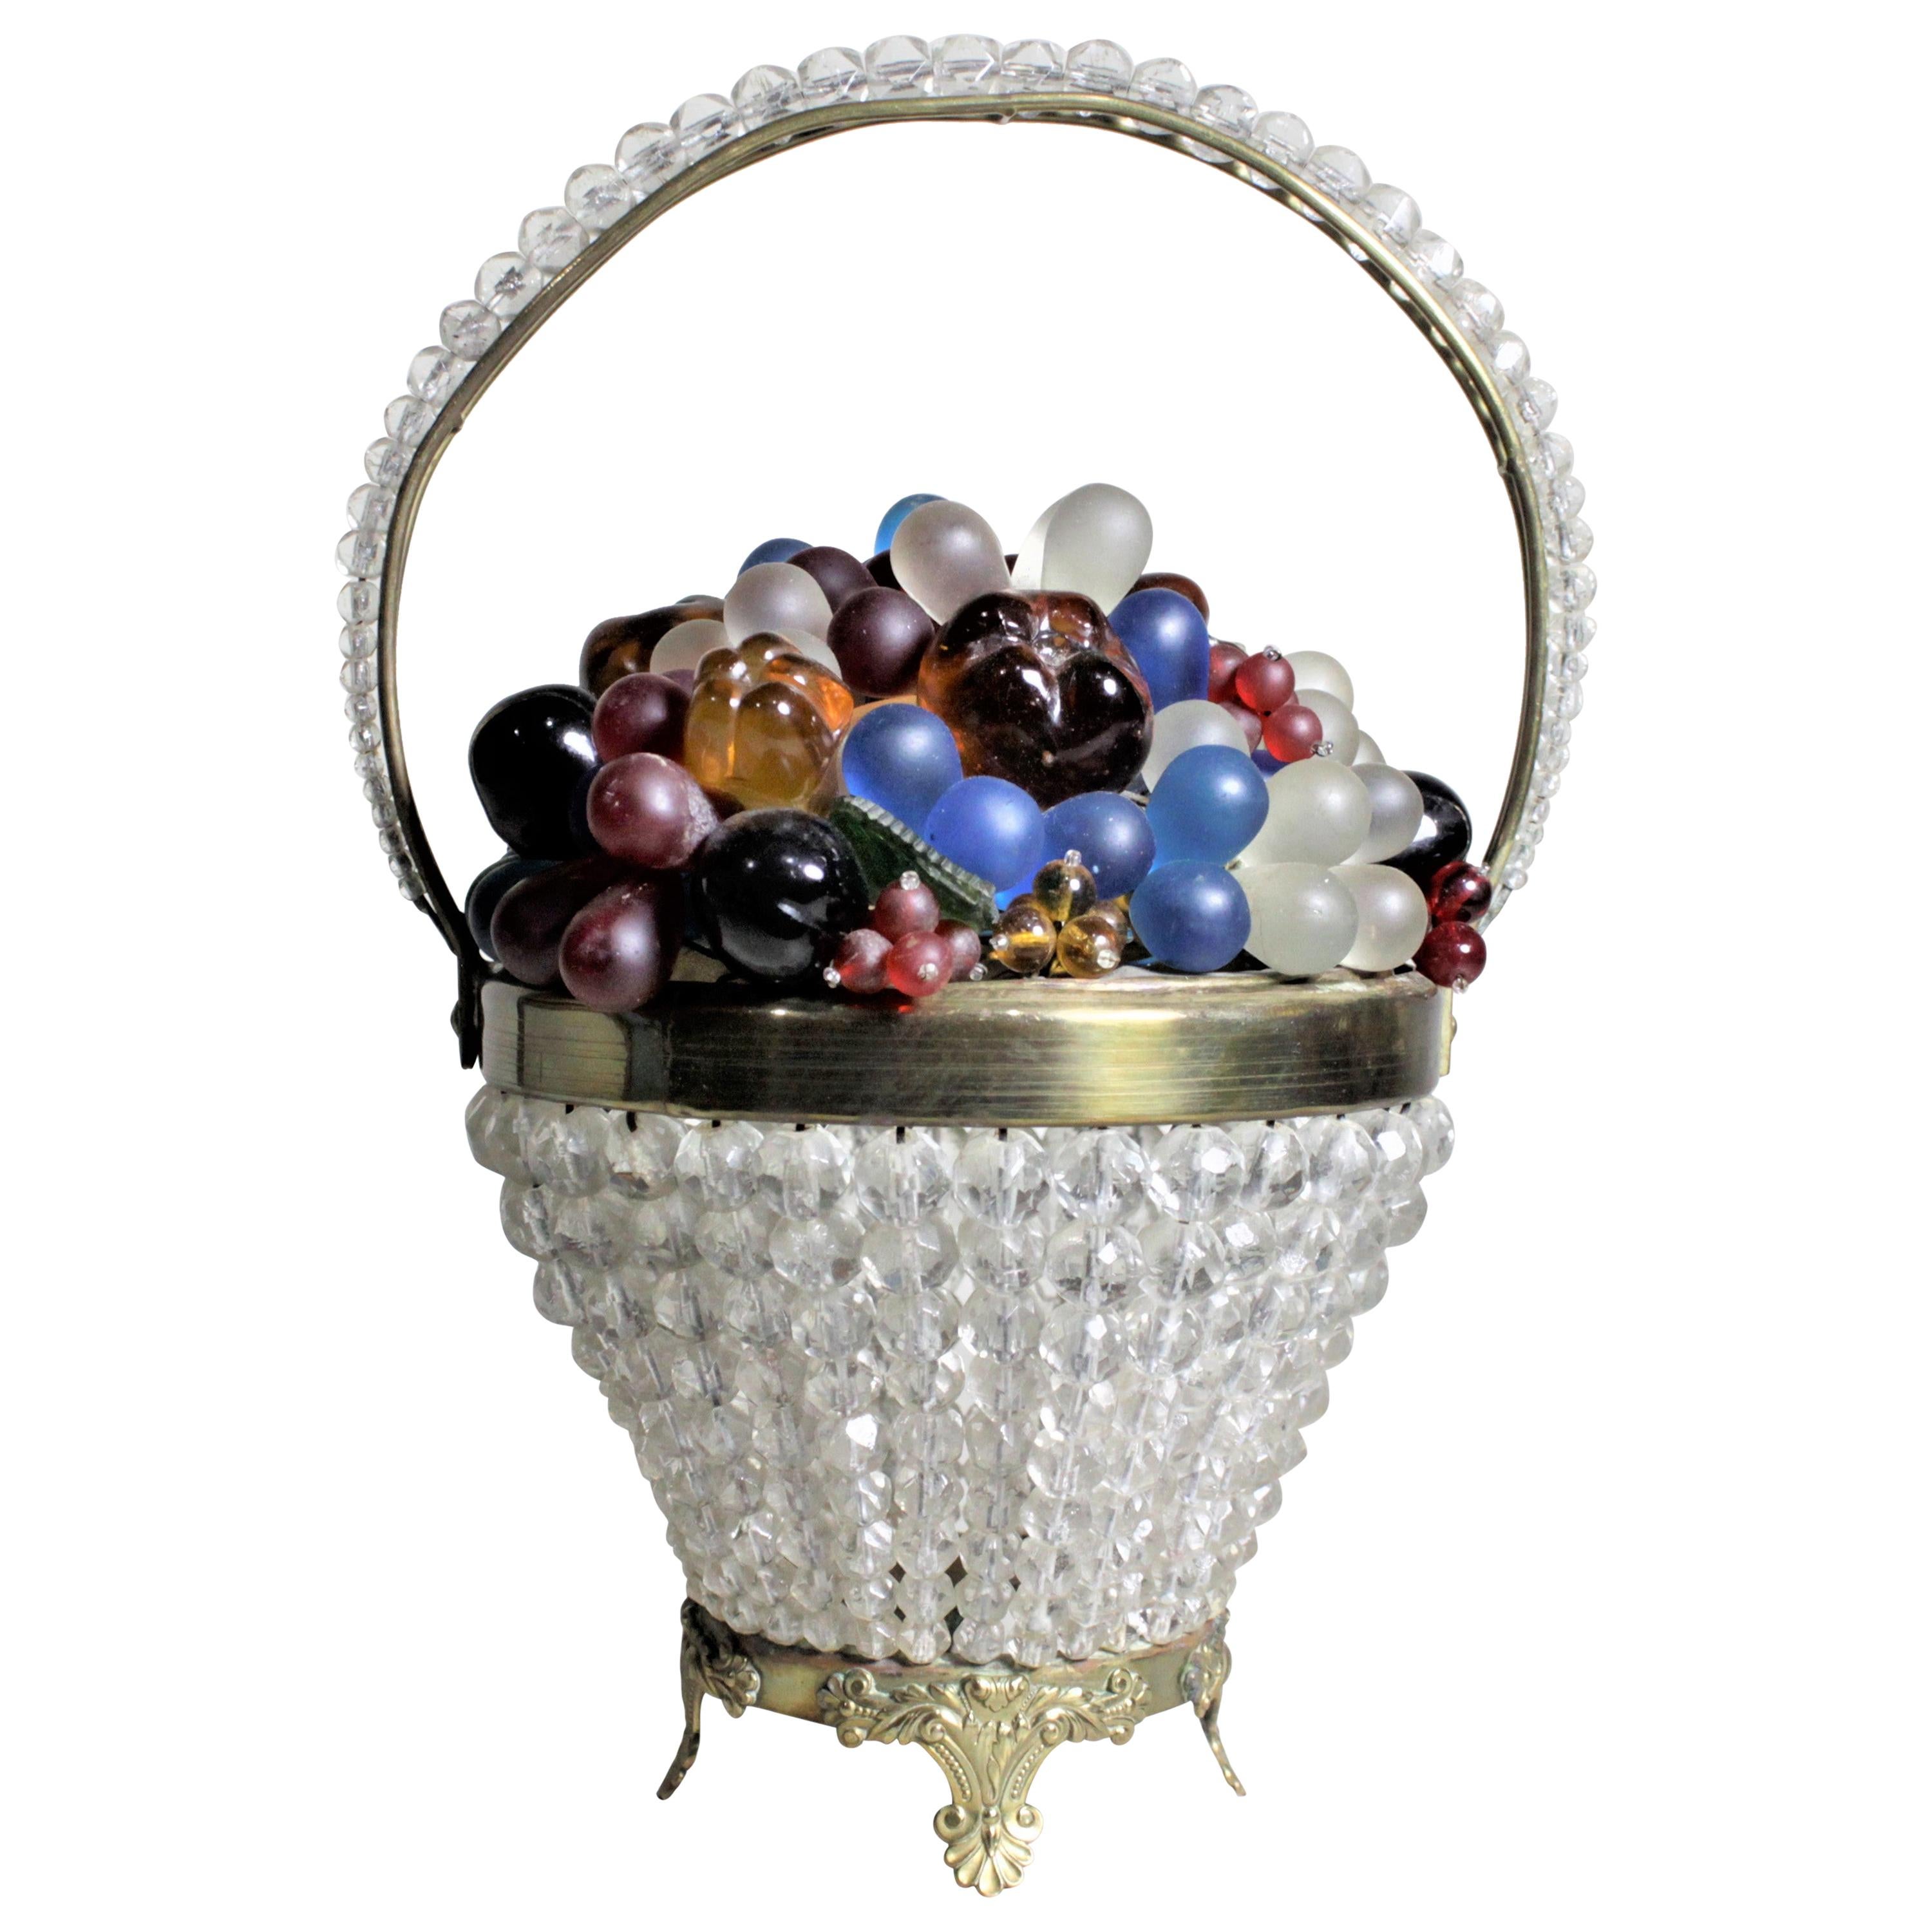 Czech Art Glass Figural Fruit and Flower Basket Lamp or Accent Light For Sale